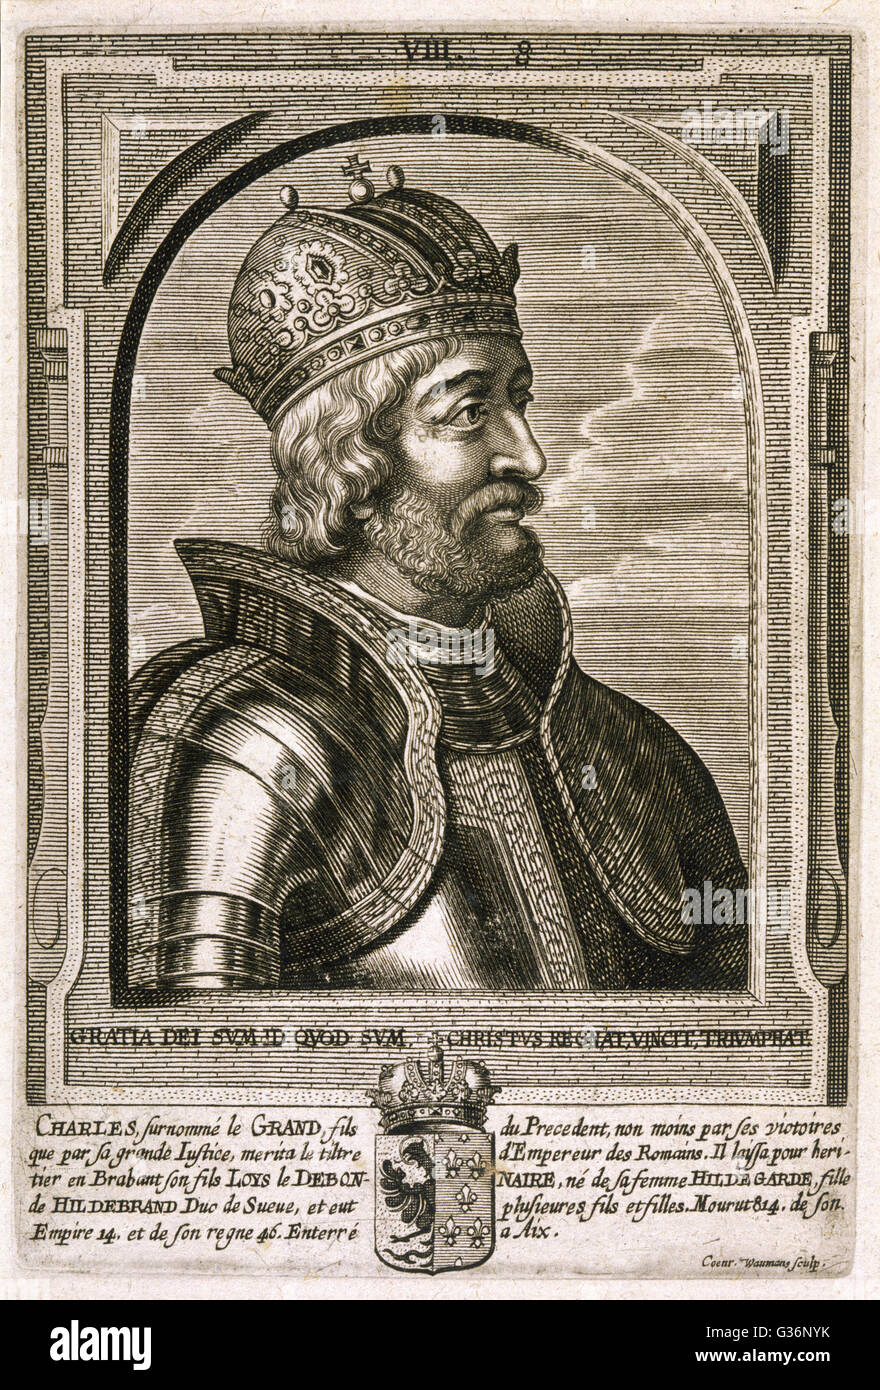 Charlemagne (Carolus Magnus. Karolus Magnus, Charles the Great), King of the Franks from 768, King of the Lombards from 774, and Emperor of the Romans from 800.      Date: 742 - 814 Stock Photo